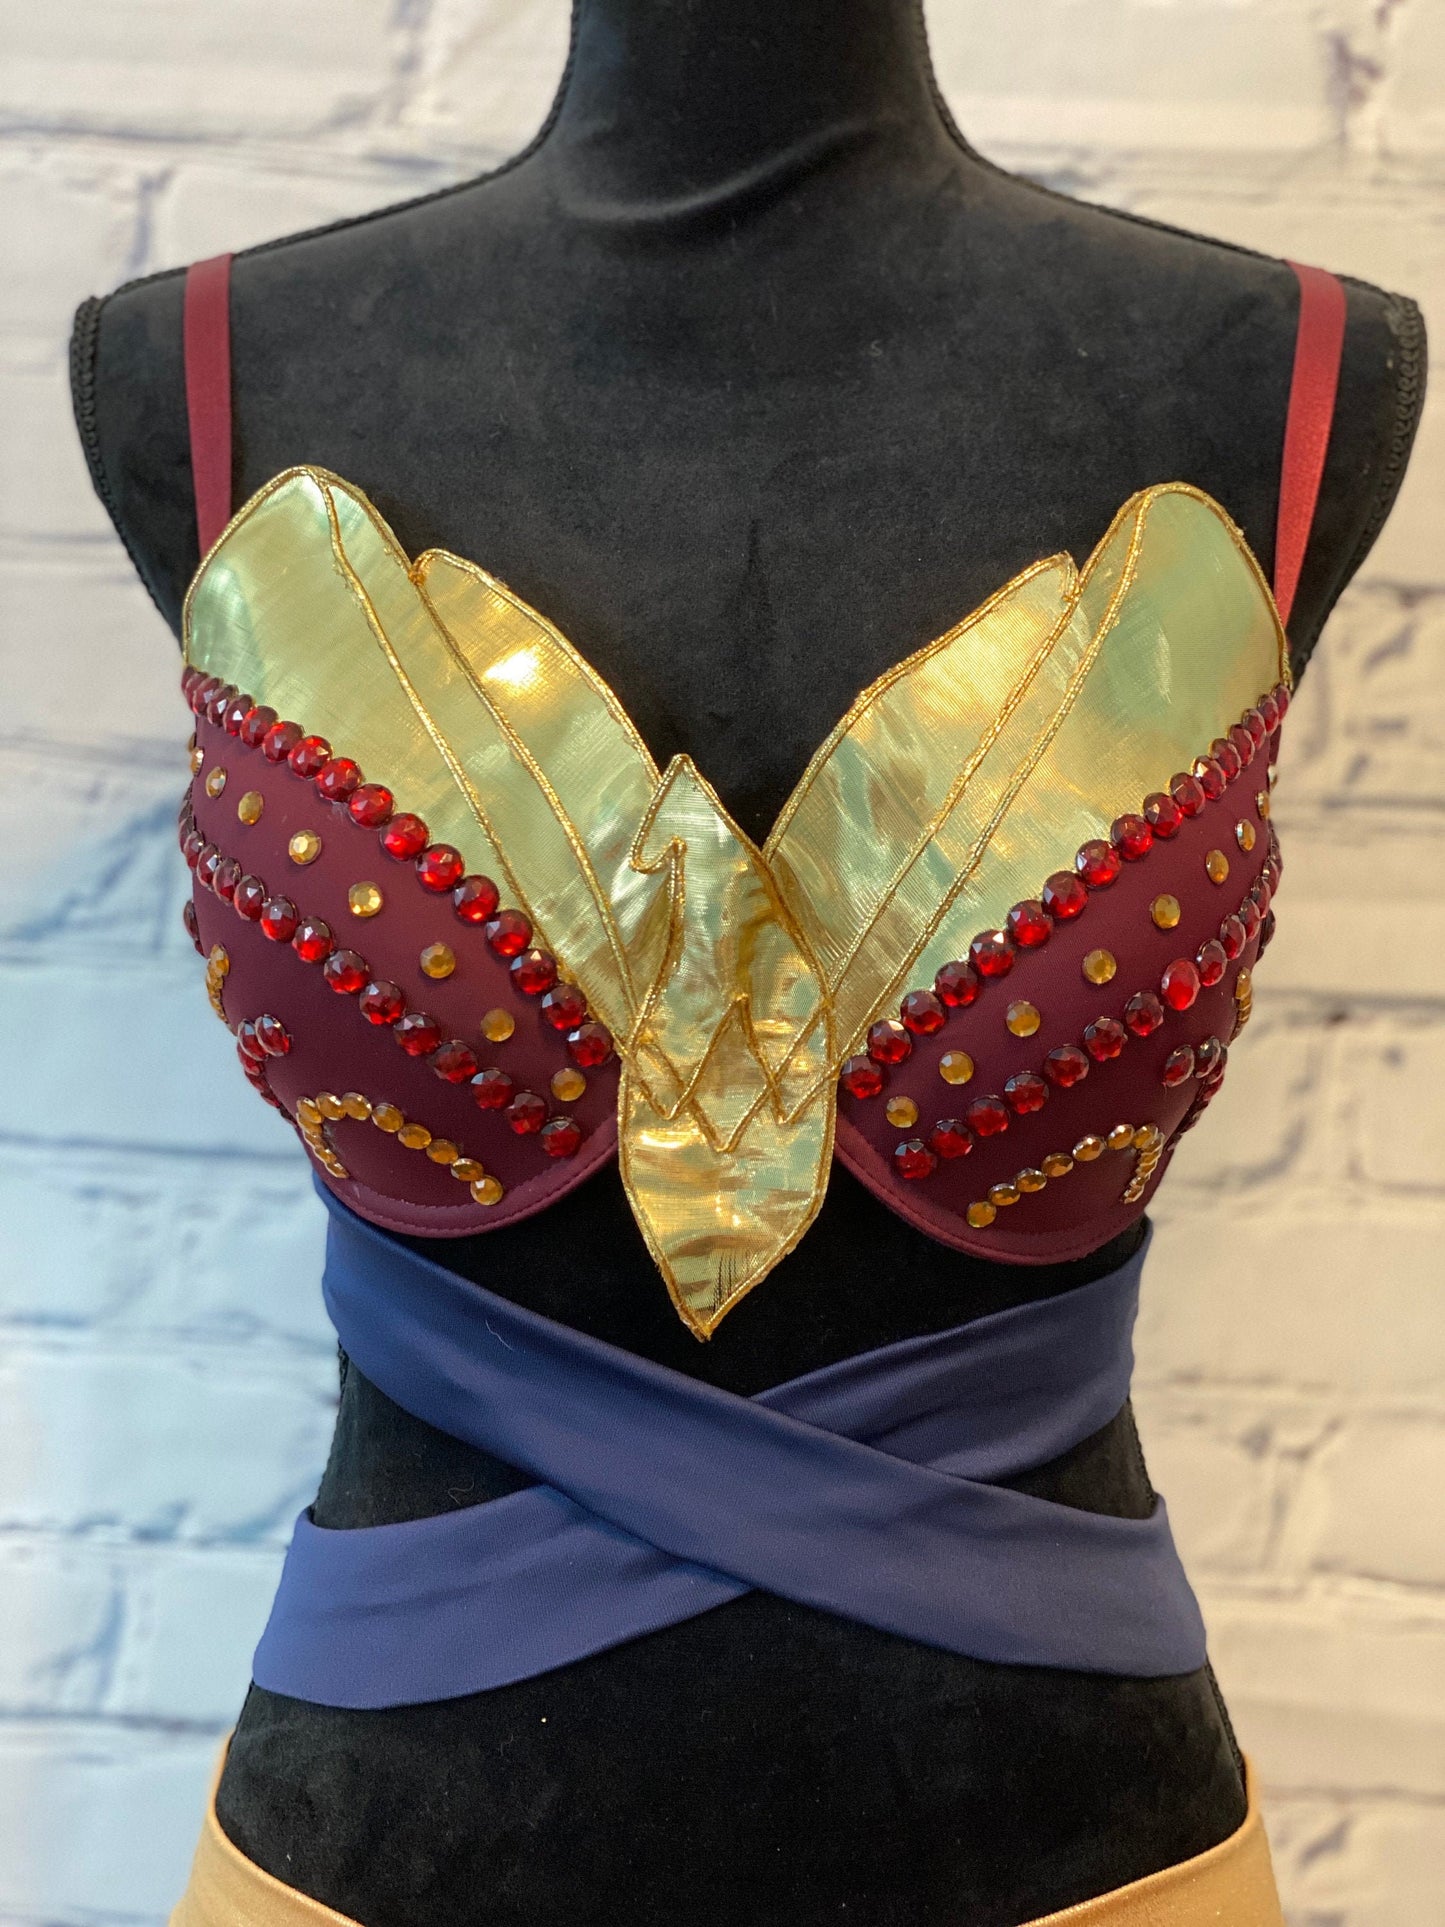 DC's Wonder Woman Movie Inspired Rave Bra - Perfect for a Rave